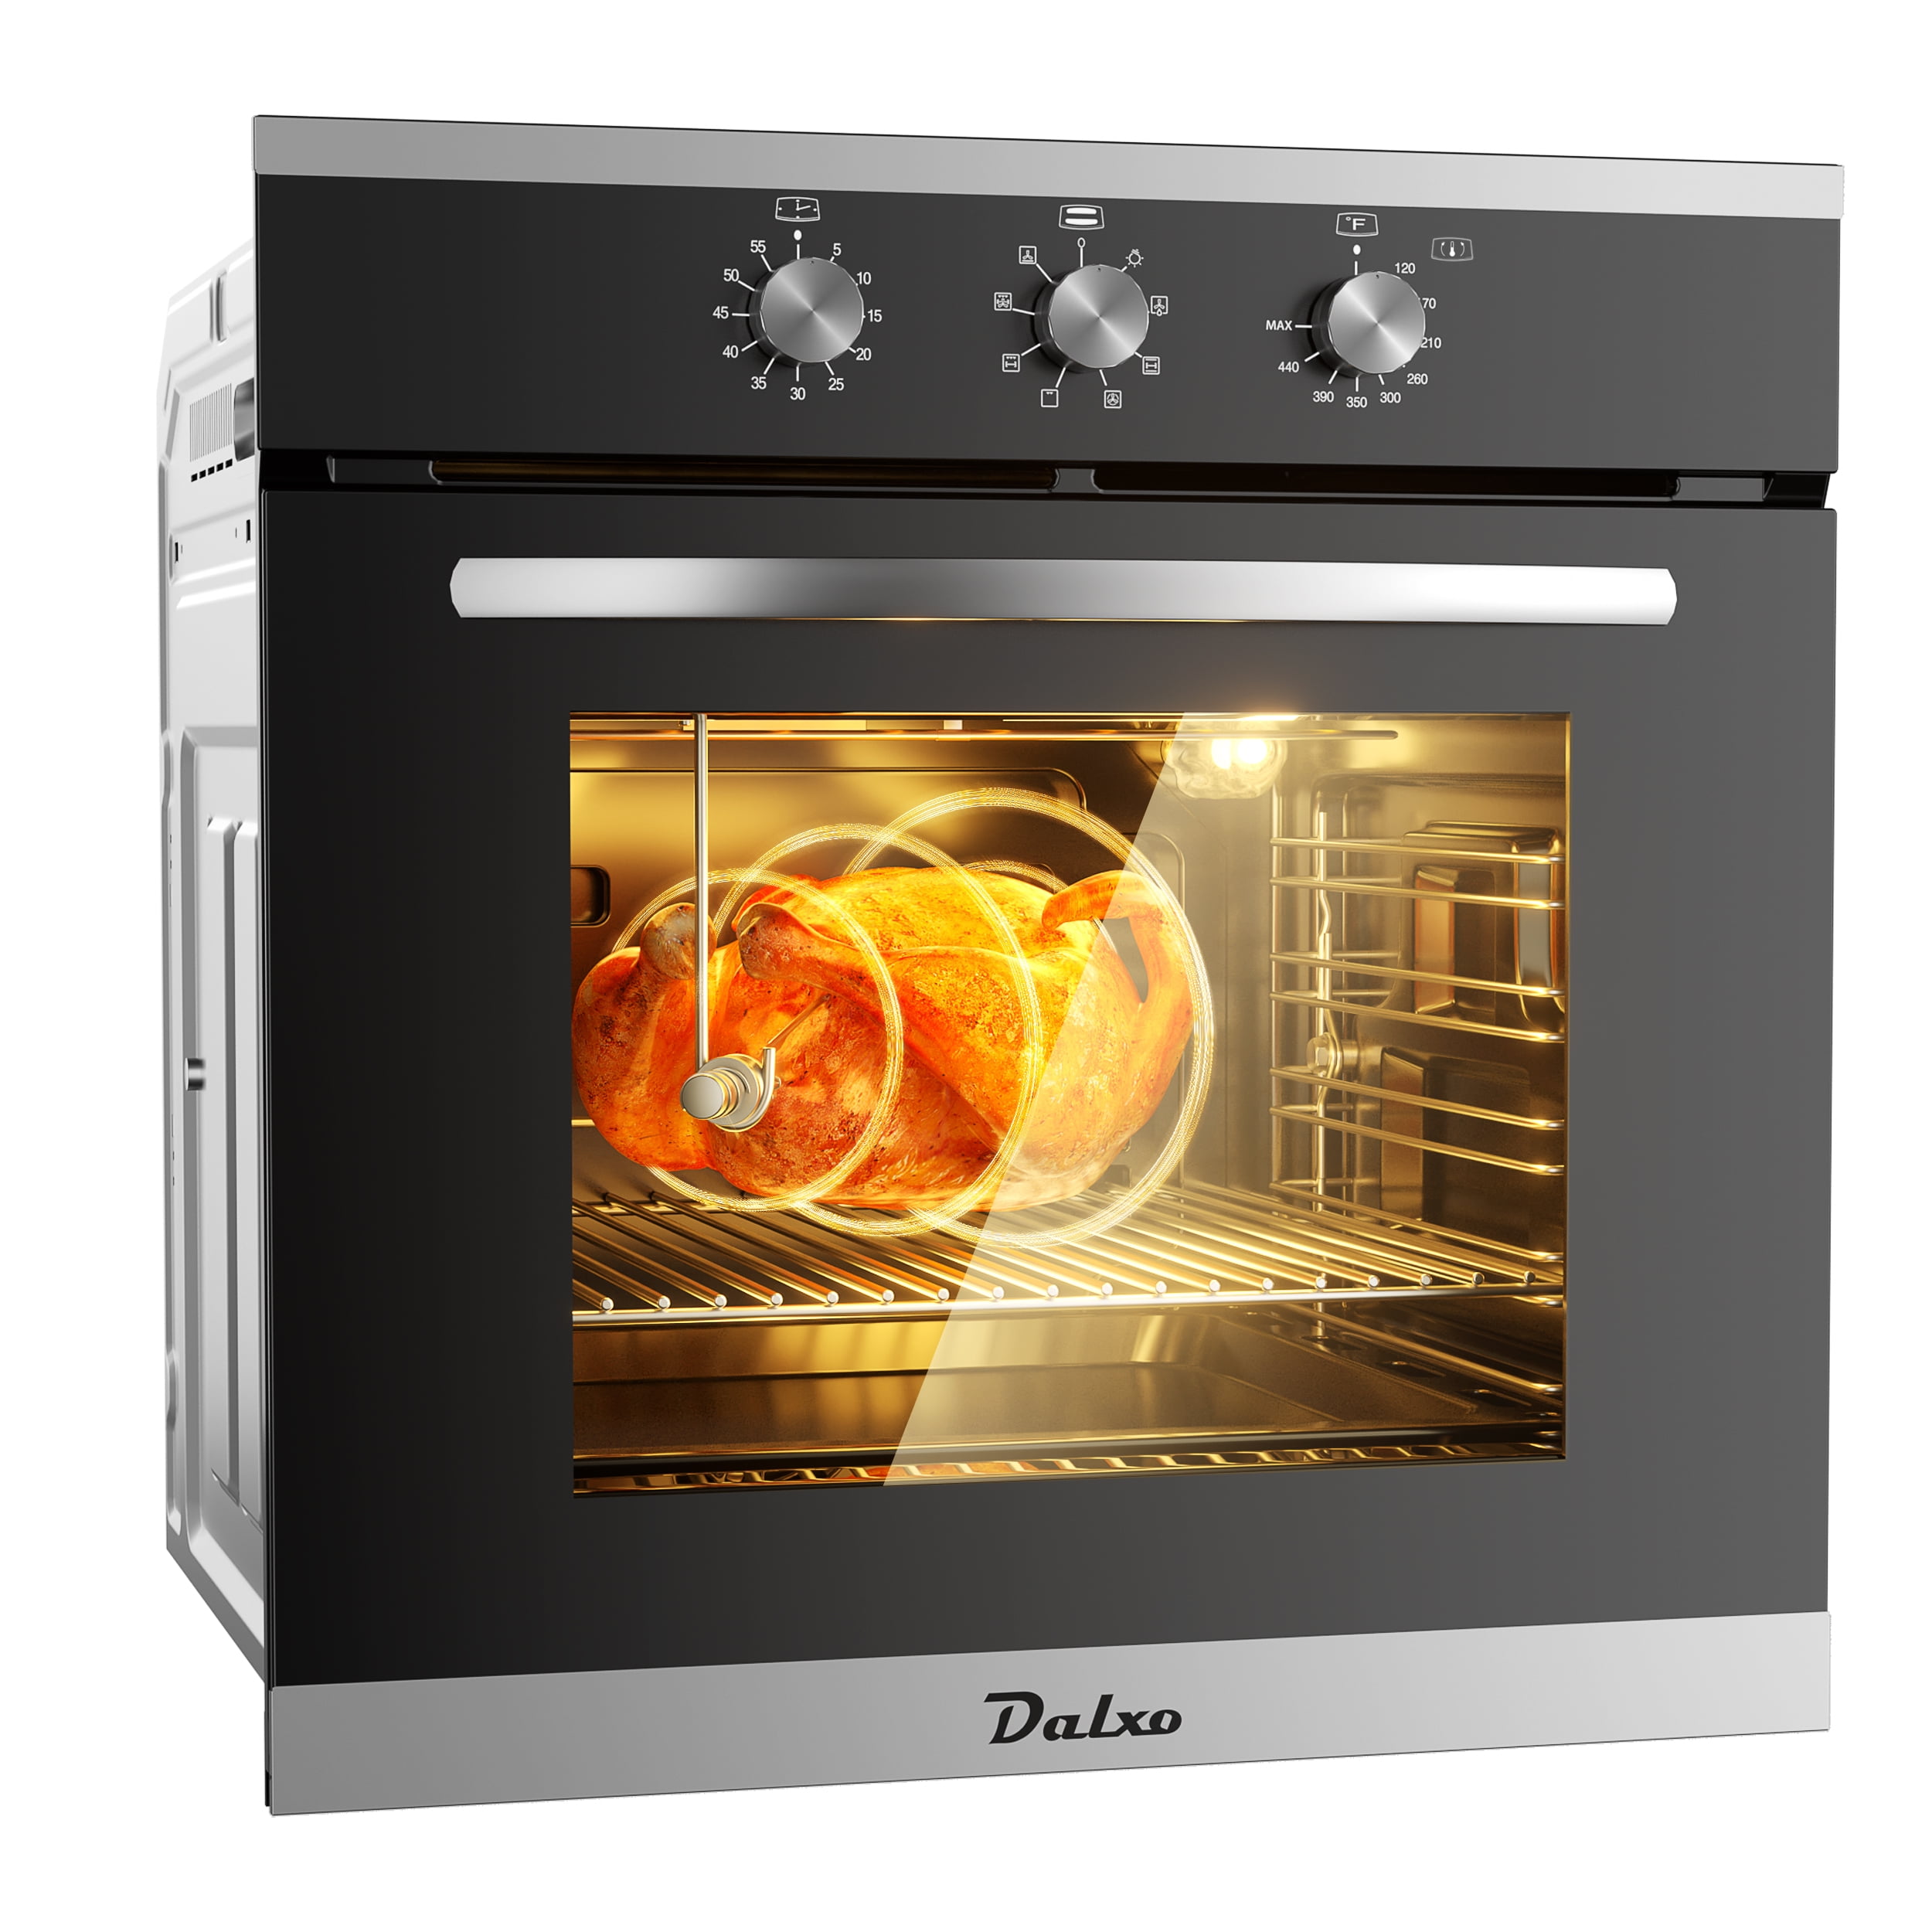 ZLINE 30 Autograph Edition Double Wall Oven with Self Clean and True Convection in DuraSnow Stainless Steel - AWDSZ-30, Gold